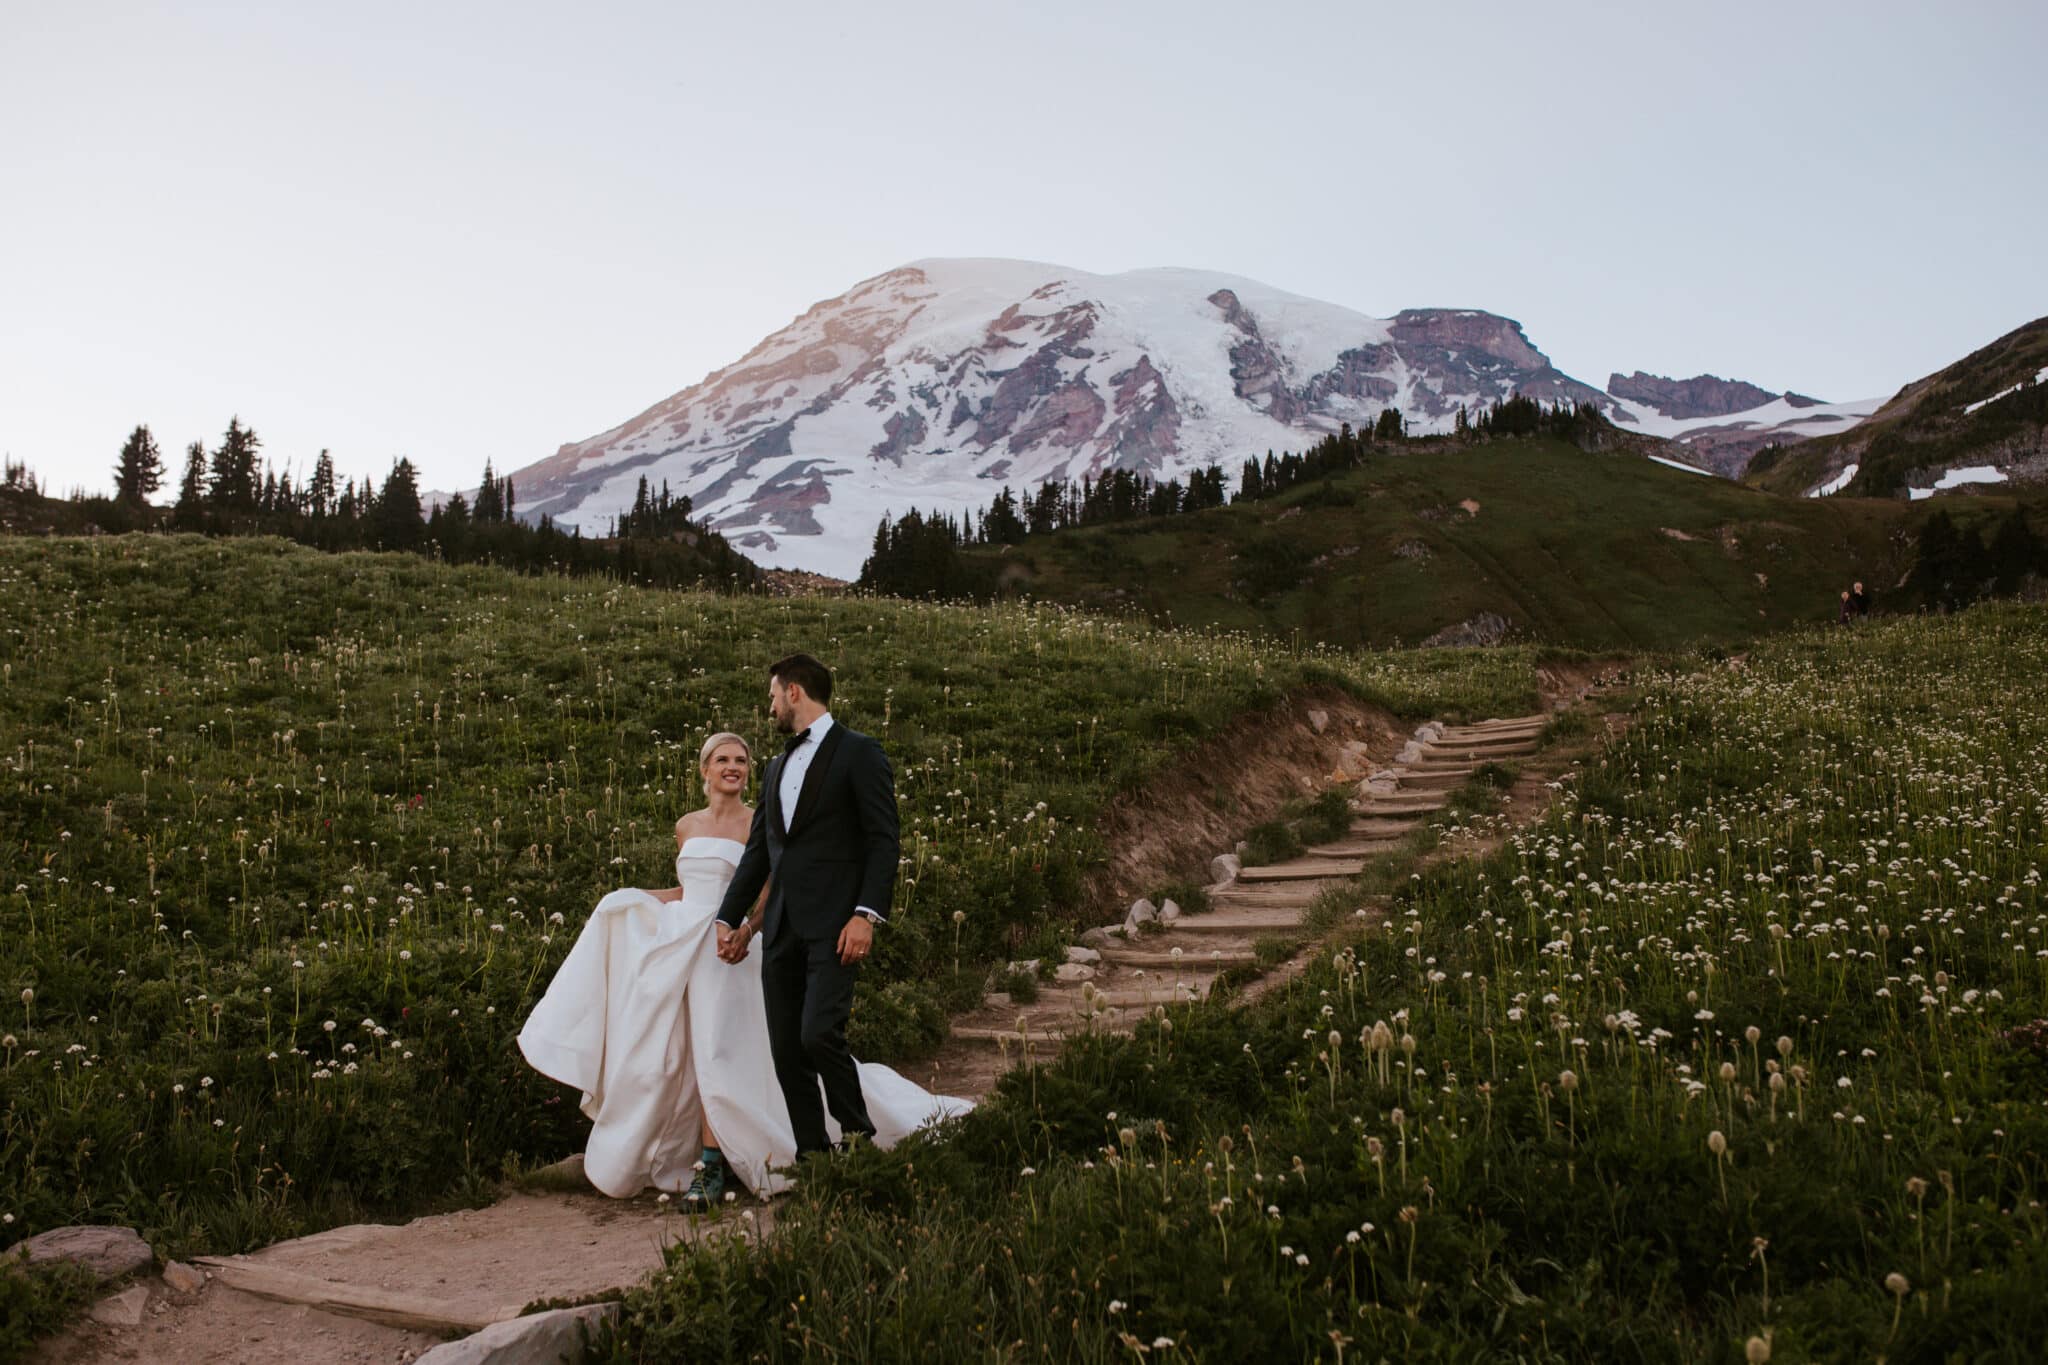 5 Reasons All-Day Elopements are Eye-Opening and Spectacular